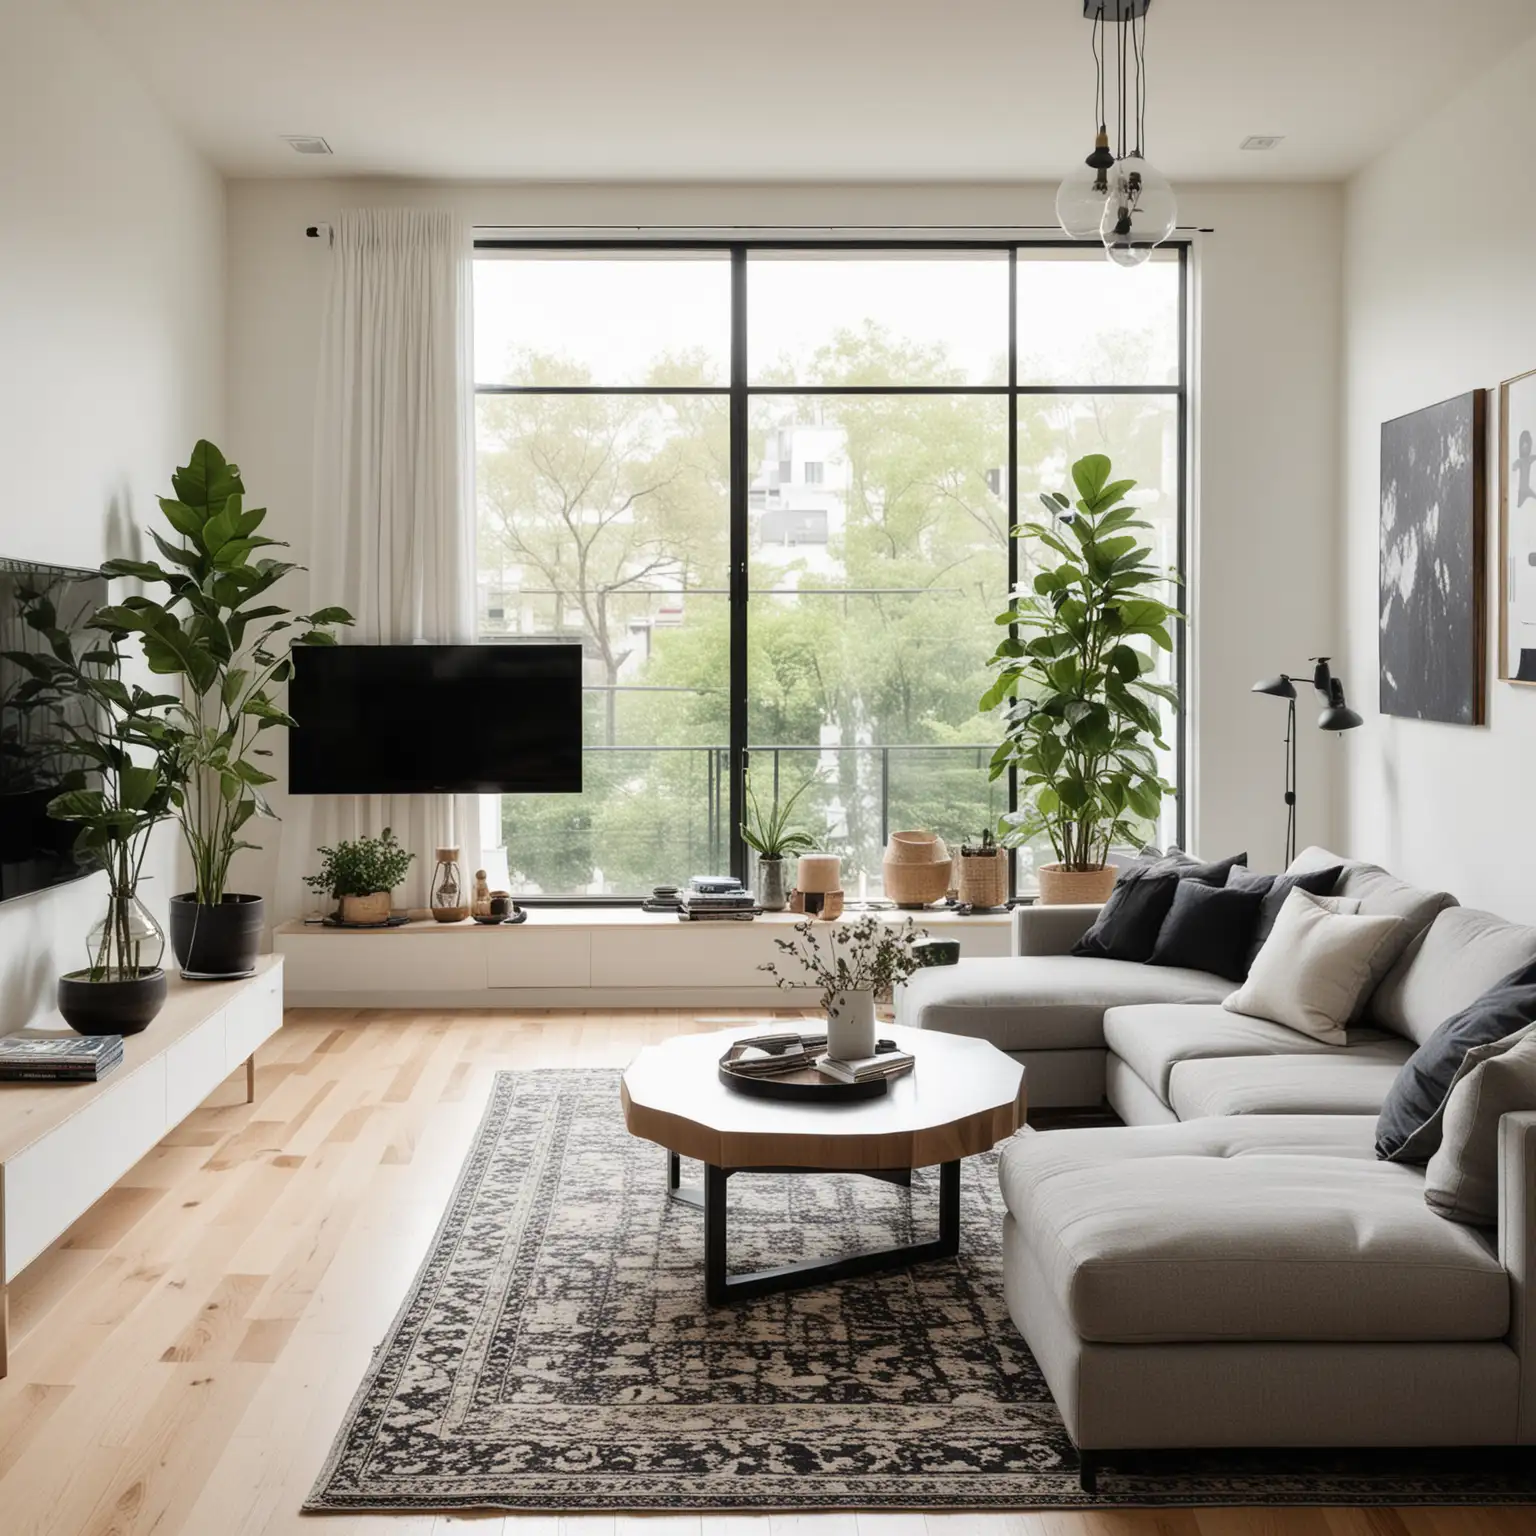 a wide shot of Minimalist Modern Living Room: A spacious living room with white walls, large floor-to-ceiling windows, and light wood flooring. Include a low-profile grey sectional couch with white throw pillows, a sleek black coffee table, and a geometric area rug. Add a wall-mounted flat-screen TV, minimalist wall hangings, a large abstract painting, and a couple of hanging indoor plants. Decorate with a modern floor lamp, a few black and white vases with dried flowers, a single large potted plant, and a sleek air conditioner.